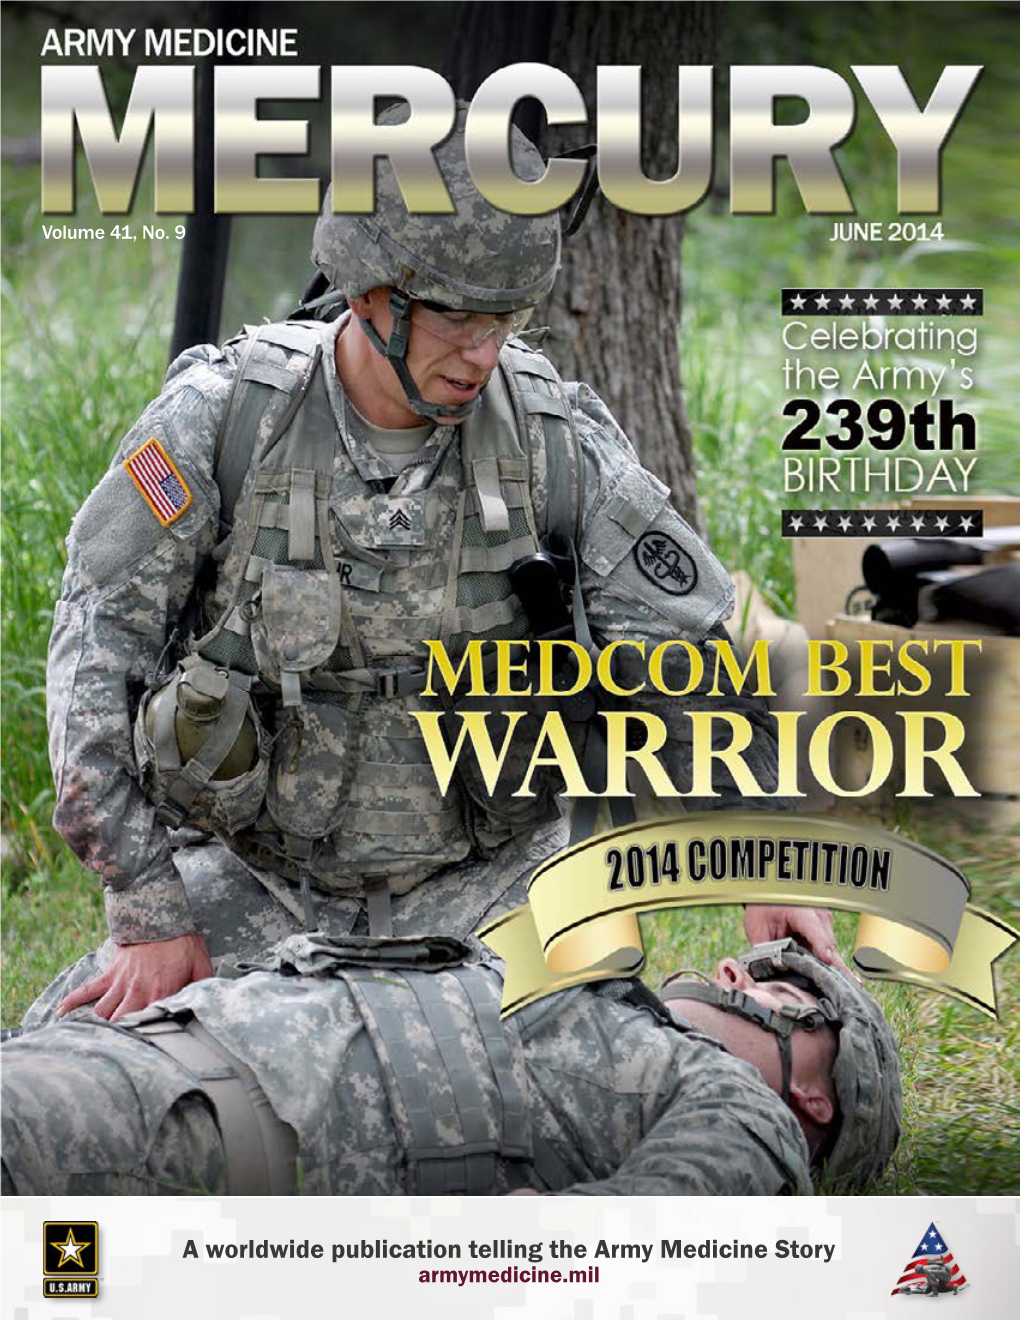 A Worldwide Publication Telling the Army Medicine Story ARMY MEDICINE MERCURY CONTENTS DEPARTMENTS